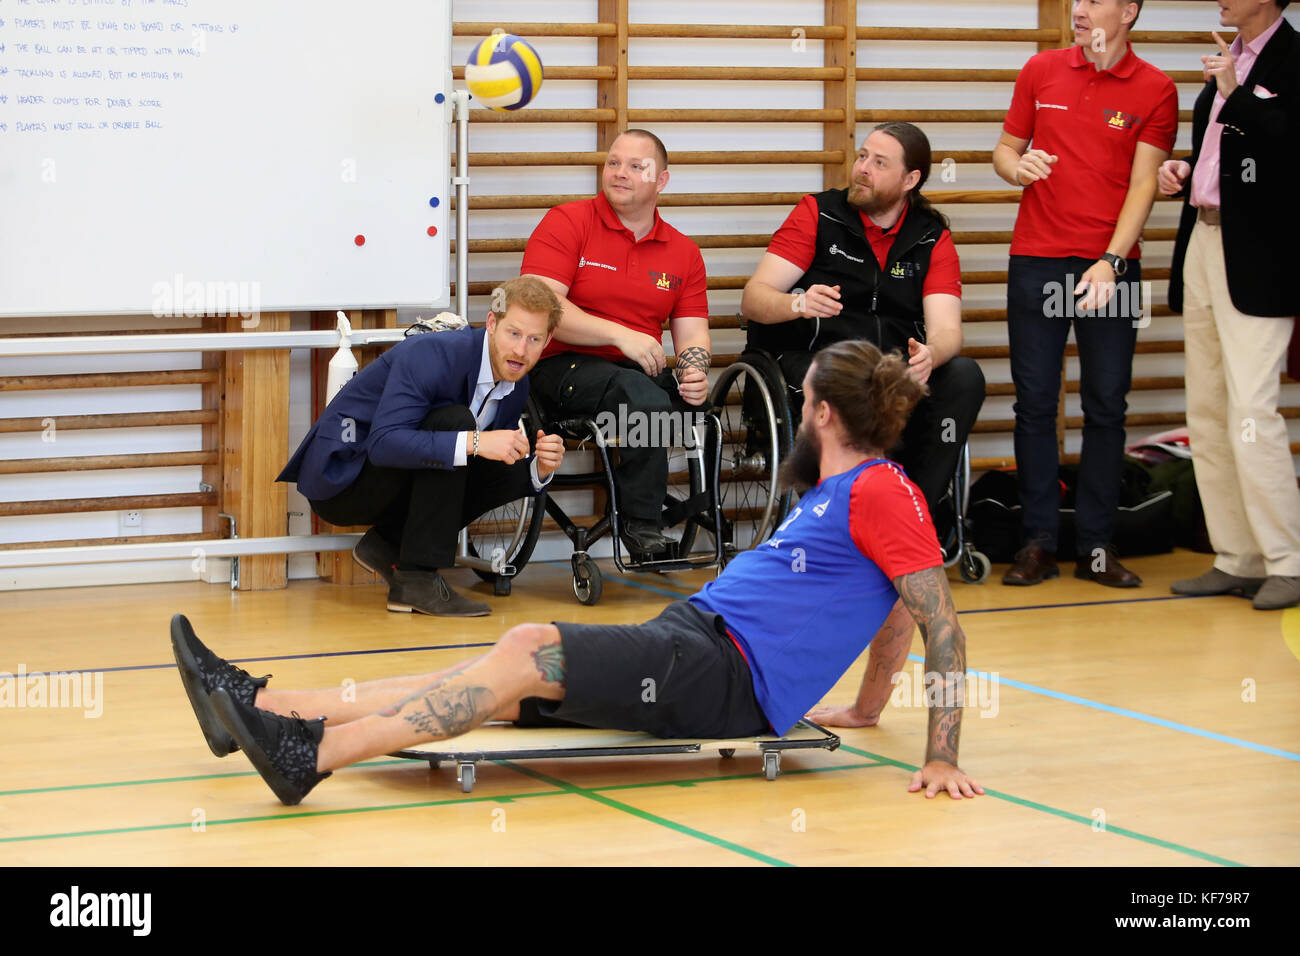 Prince Harry watches a Rolling Floorball match, a sport invented by Danish veterans at the Copenhagen Danish Veterans Centre, which uses sport to aid rehabilitation from injury, in Copenhagen during his official visit to Denmark. Stock Photo